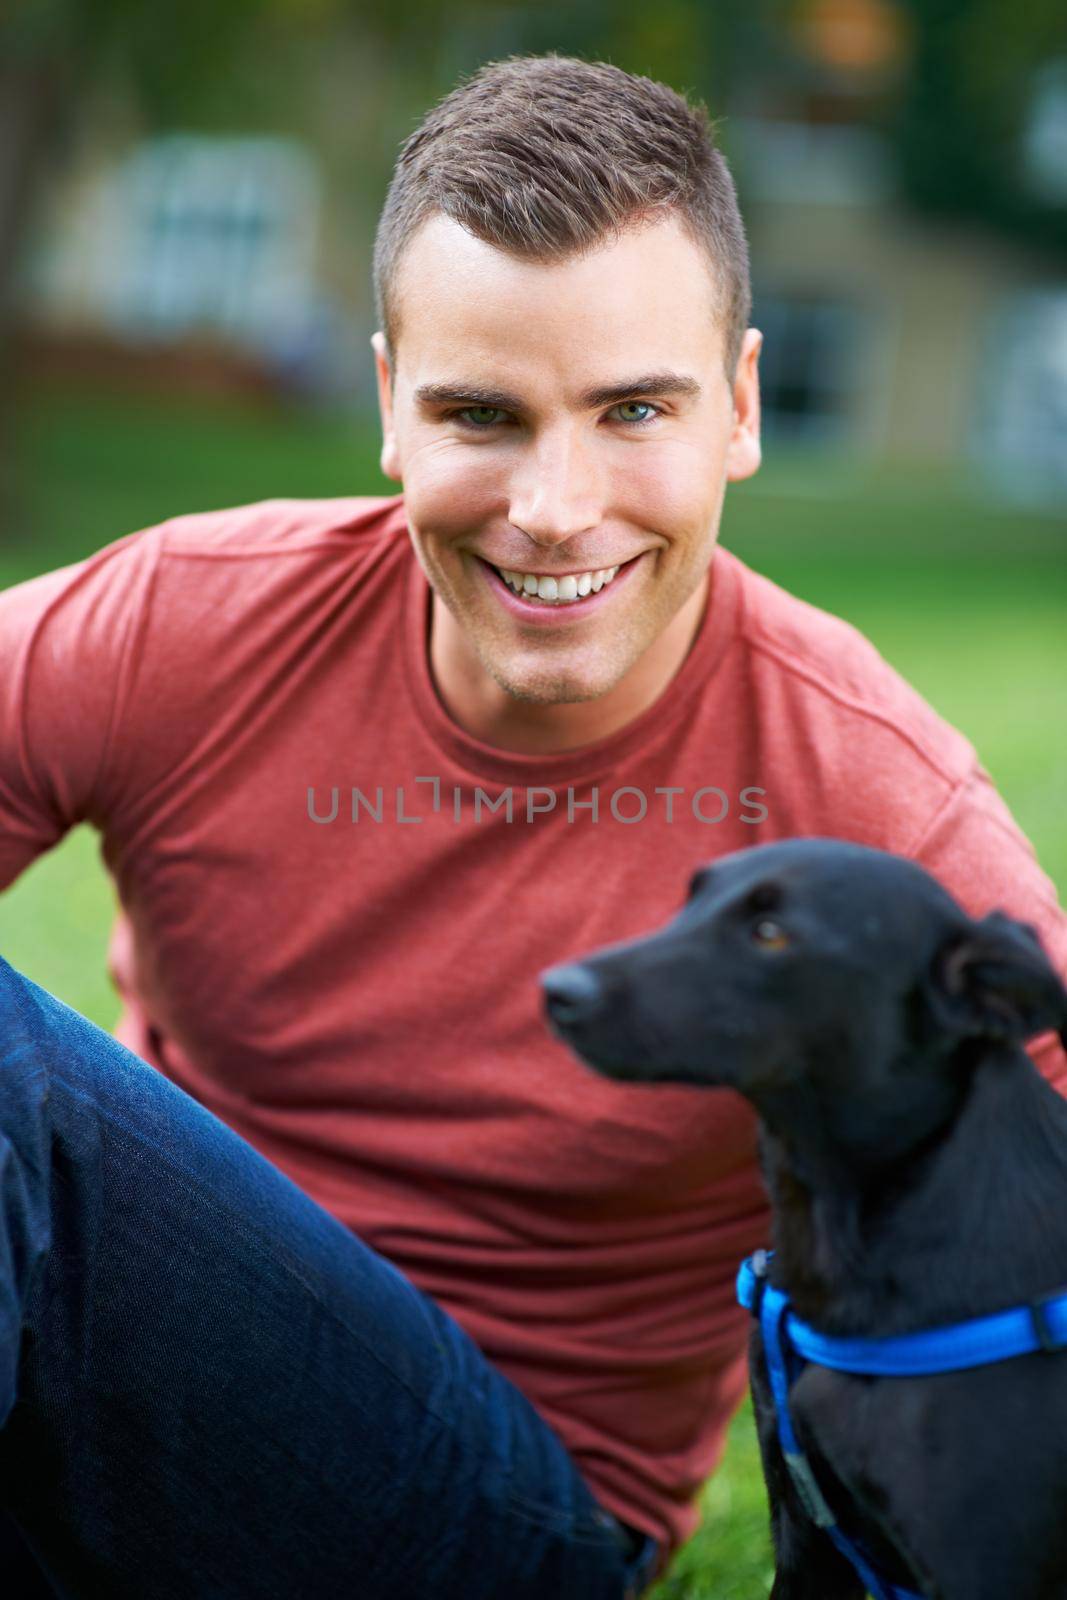 Hes my best friend. A young man playing with his dog outdoors